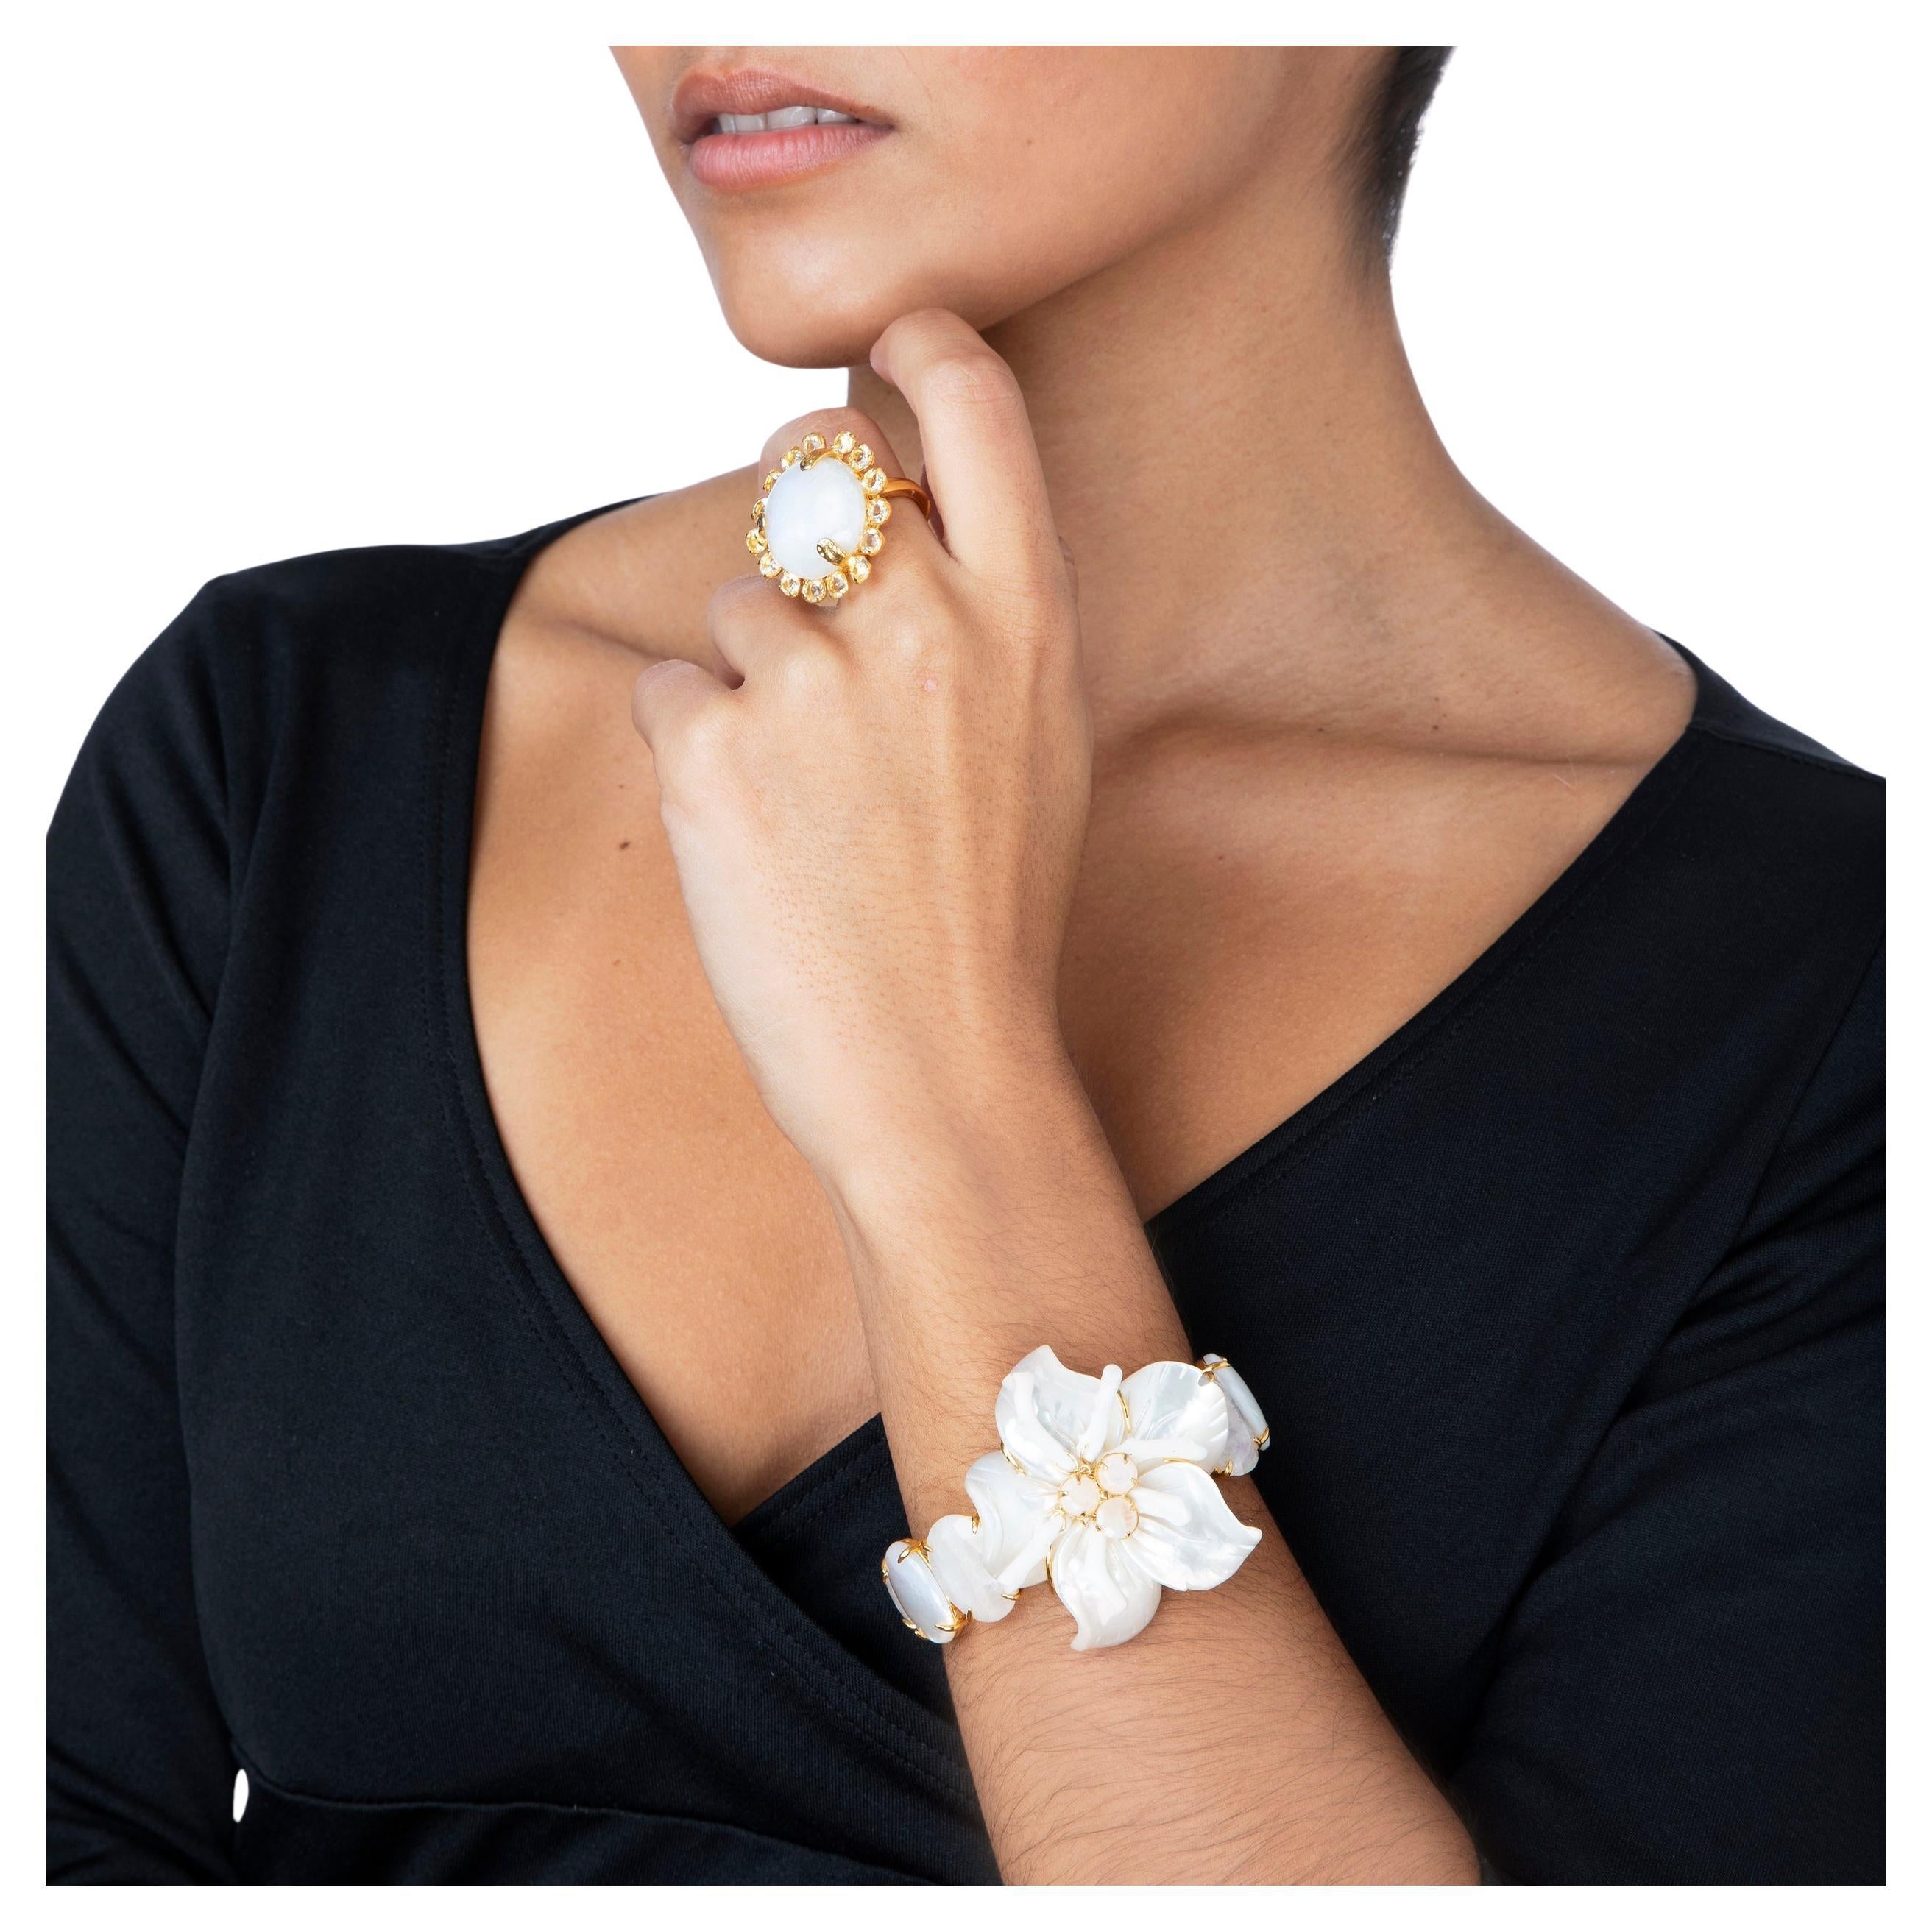 The Cassie Cuff, crafted from semi-precious stones, showcases a unique and sizable flower at its center, embodying the distinctiveness of our brand. Its vintage-style design adds to its allure.

SKU: CF-FL-31
Stones: White Coral, Mother of Pearl &